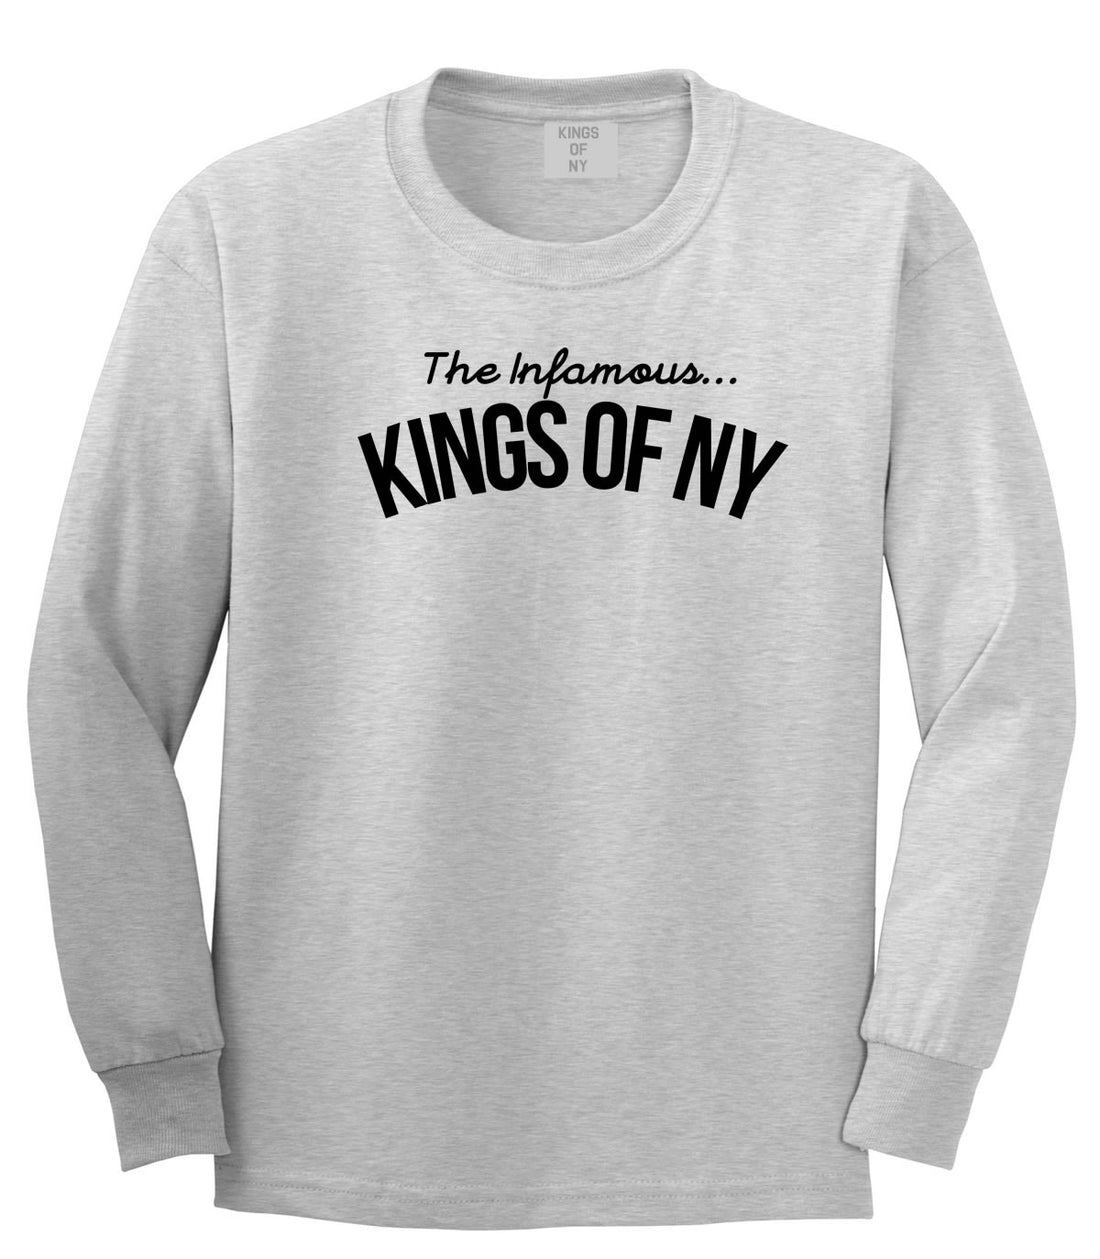 The Infamous Kings Of NY Long Sleeve T-Shirt in Grey By Kings Of NY